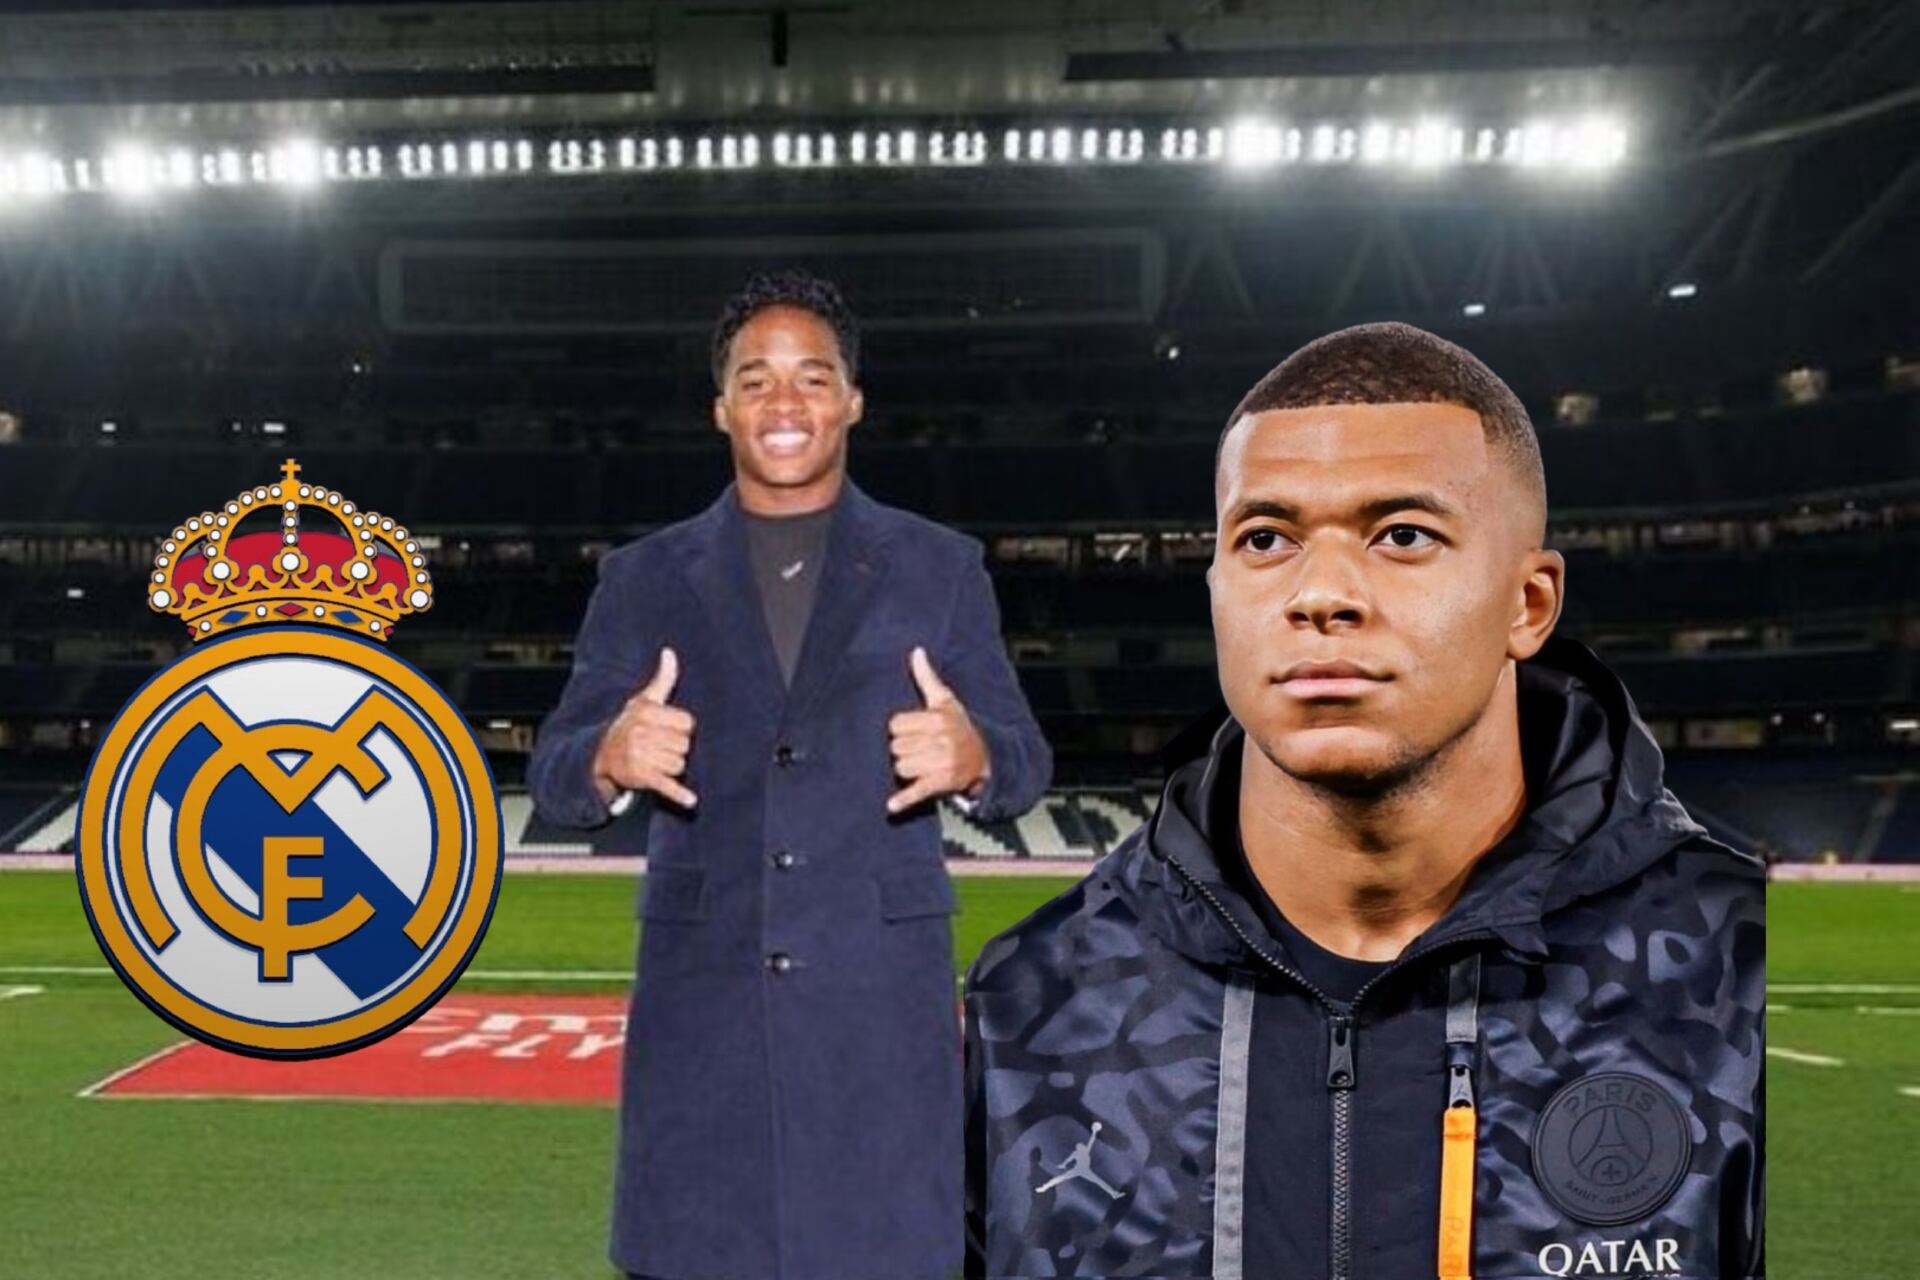 Real Madrid paid $35m for Endrick, but with Mbappé's arrival the plans they have with the Brazilian